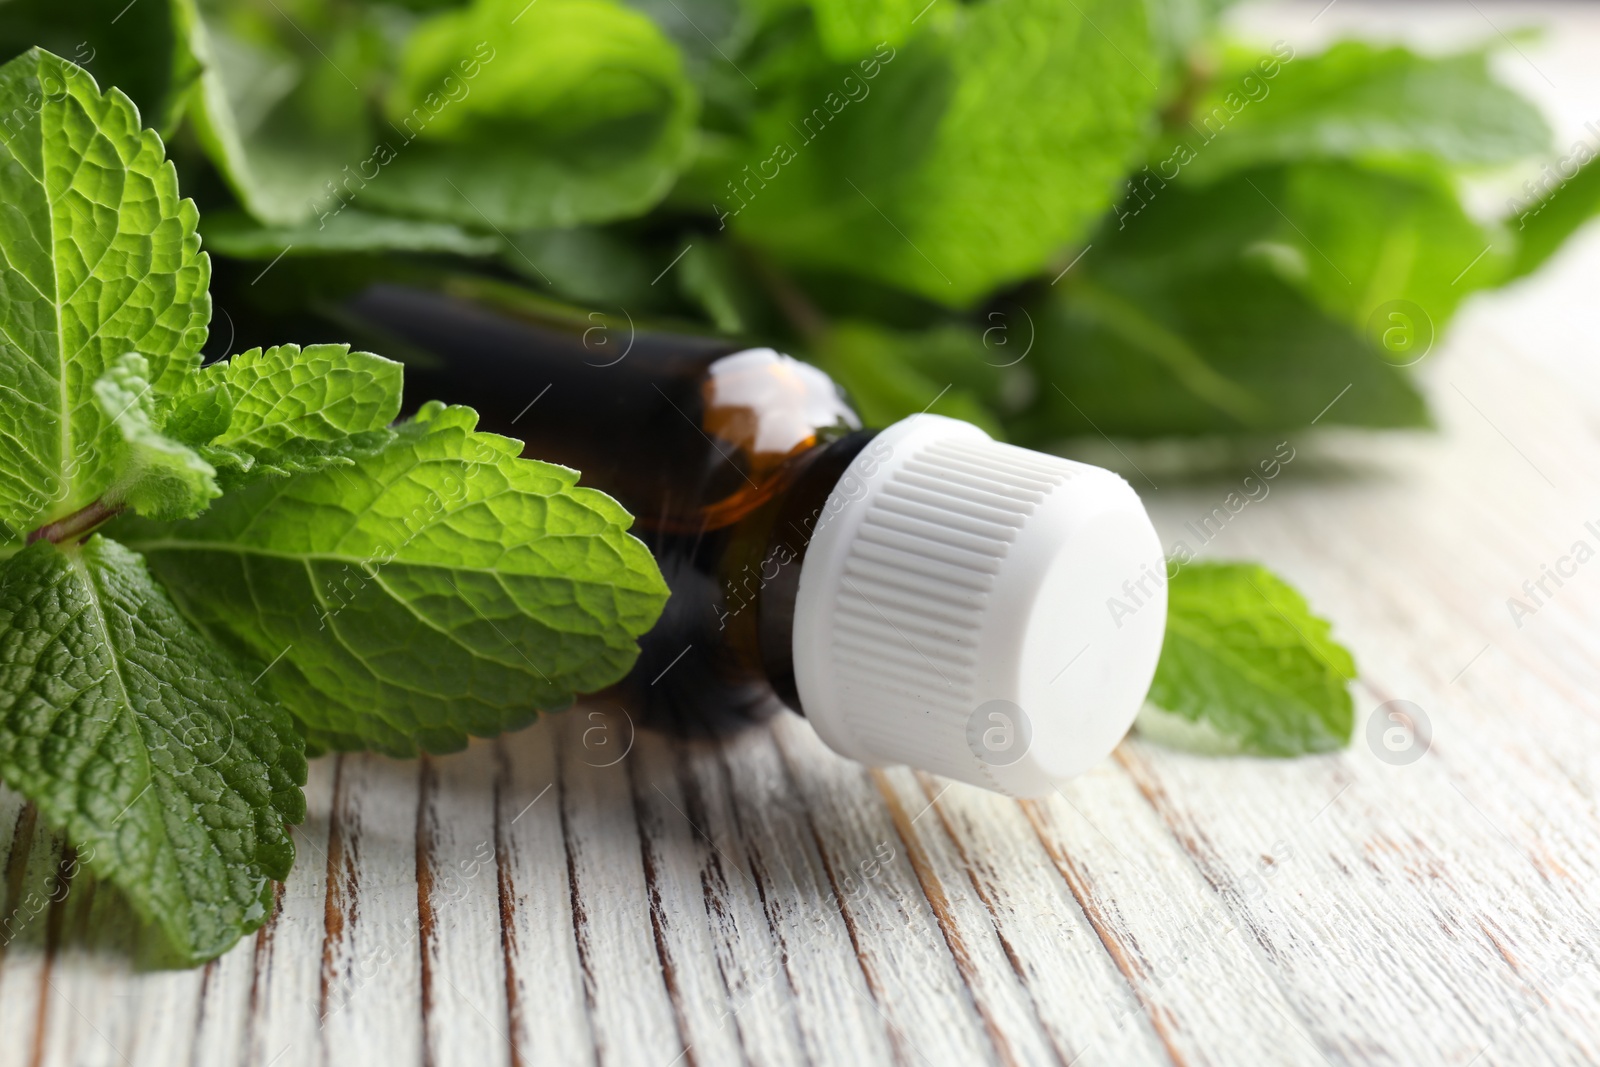 Photo of Bottle of essential oil with mint leaves on wooden table